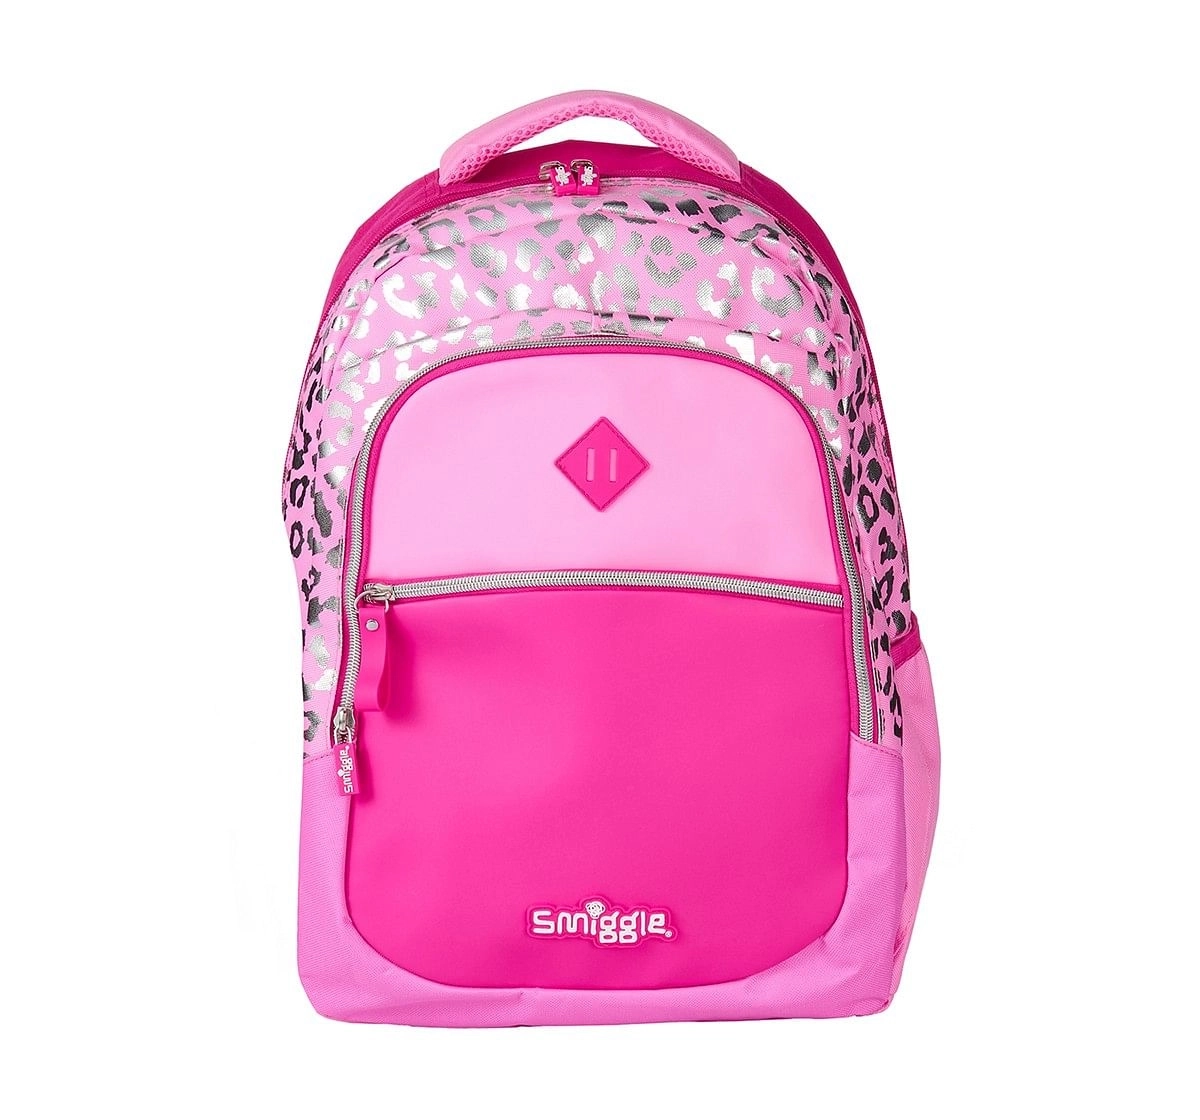 Smiggle Block Backpack - Leopard Print Bags for Kids age 3Y+ (Pink)